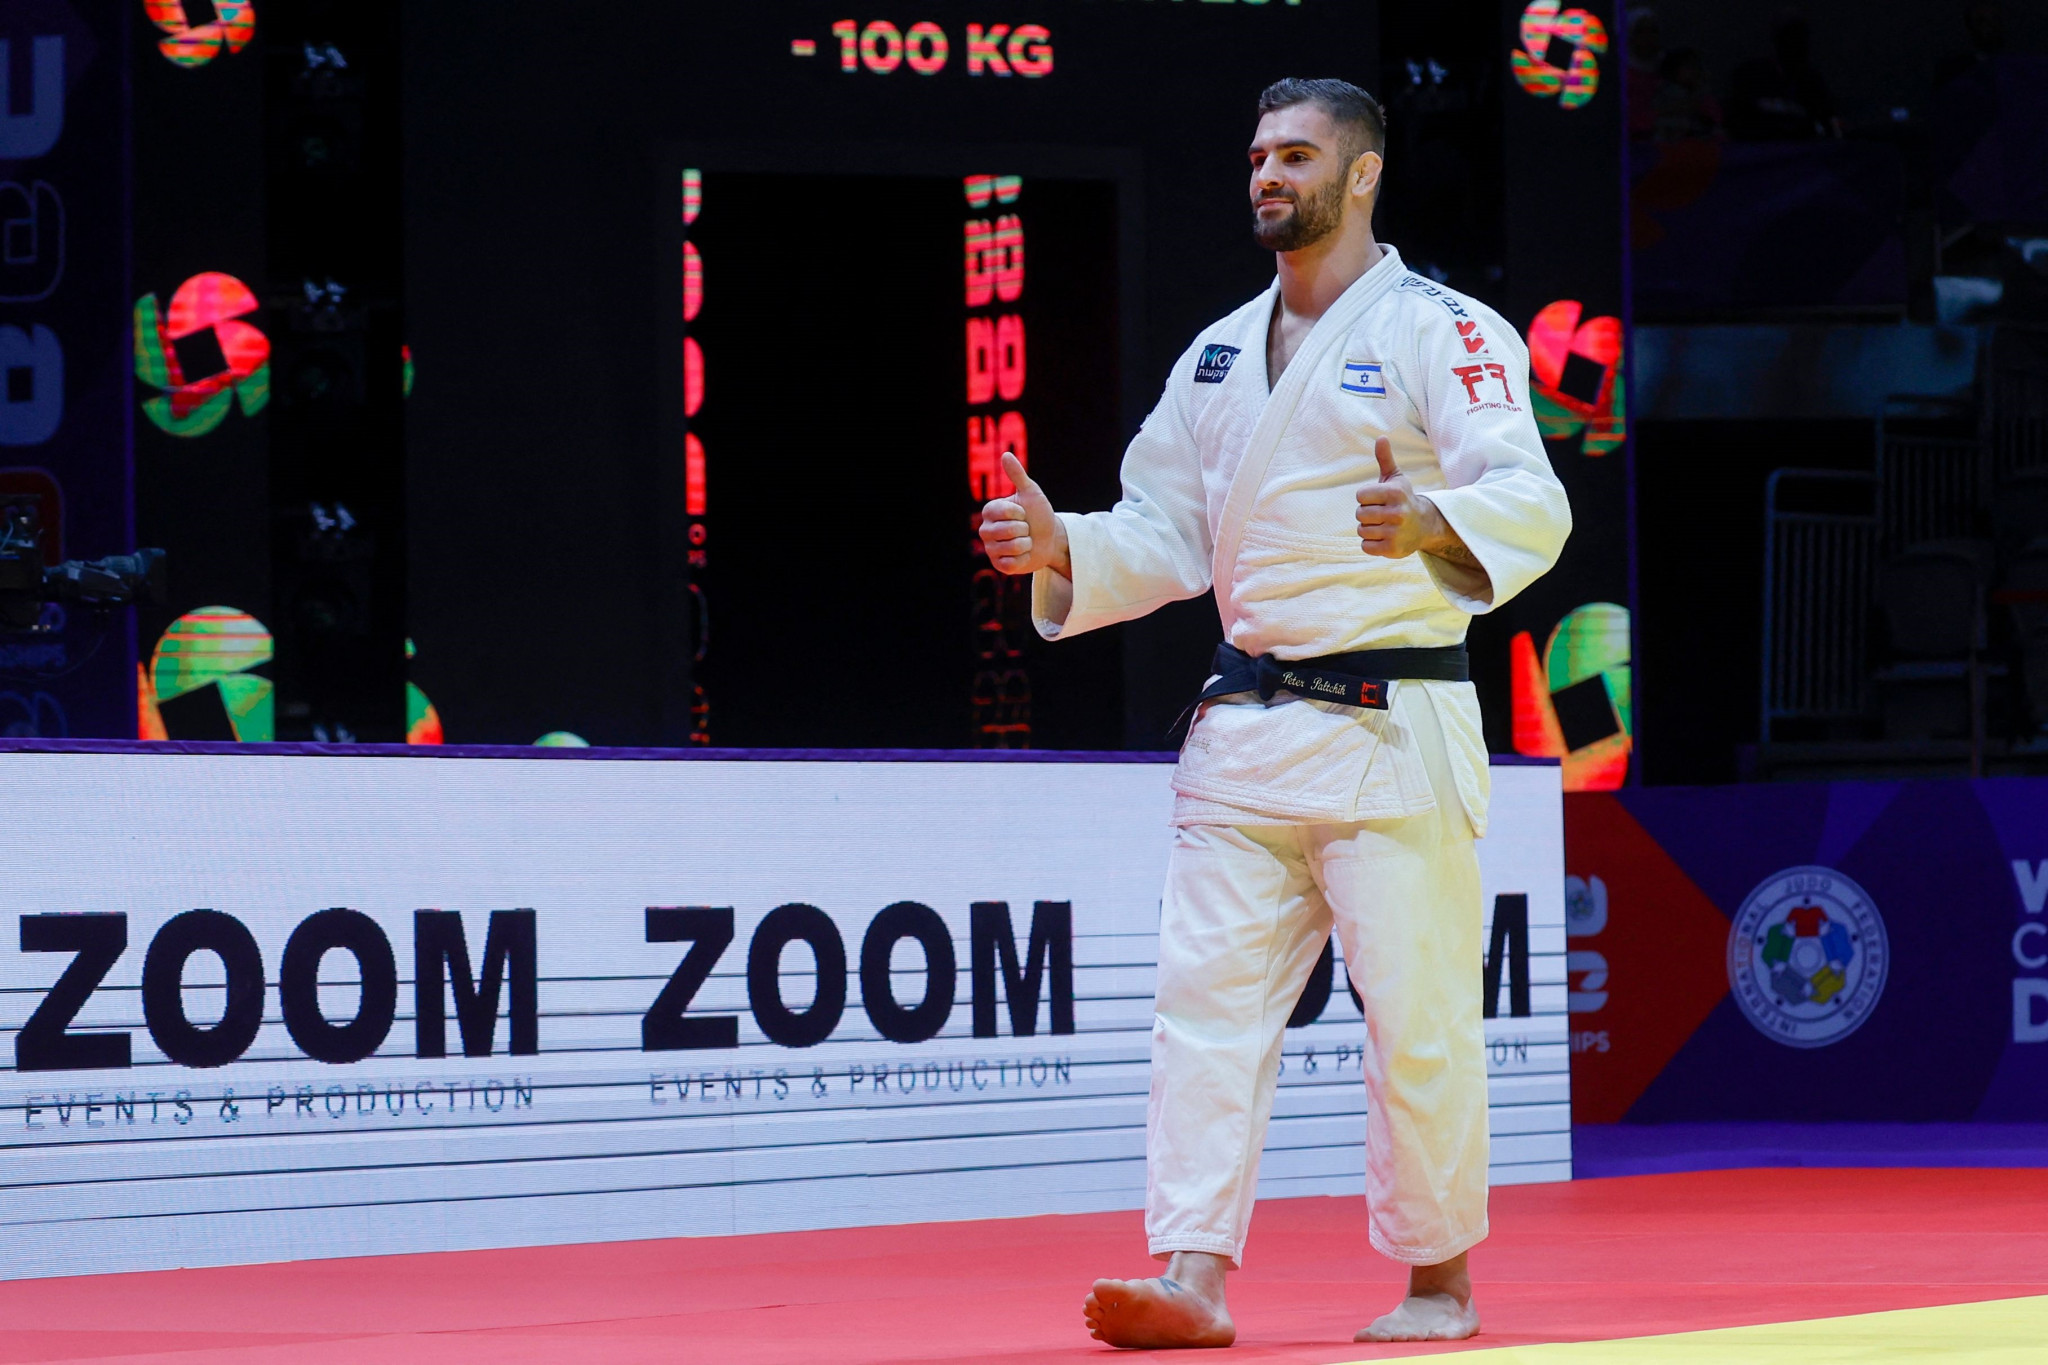 Israel's Peter Paltchik also gives the thumbs up as he won bronze after Canada's Shady El Nahas was unable to fight him due to injury ©Getty Images